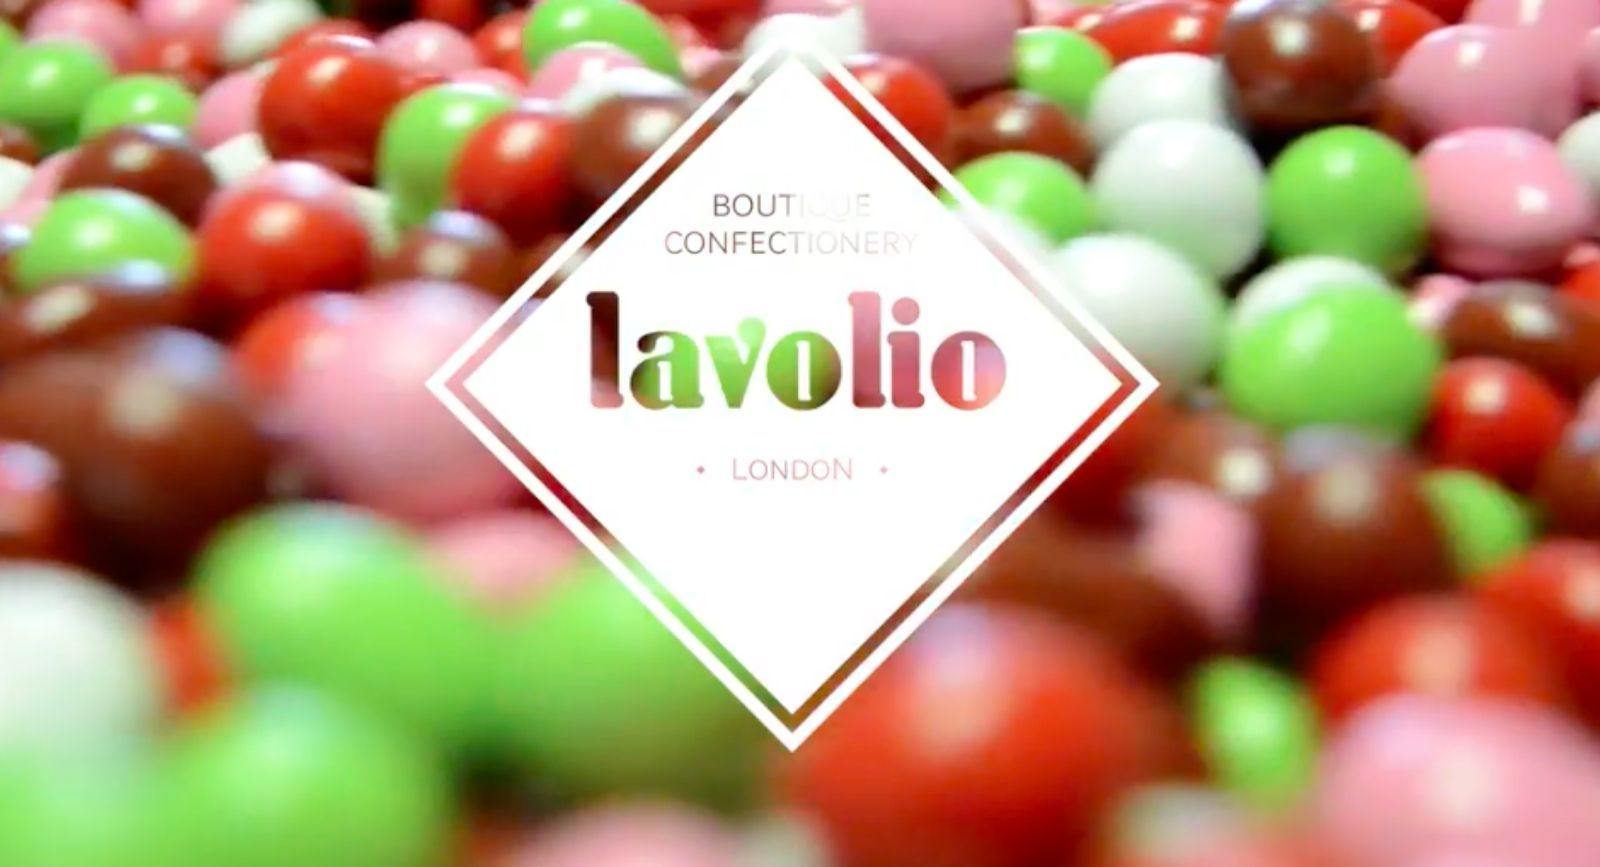 Where To Buy Gluten-Free Gifts With Next Day Delivery - Lavolio Boutique Confectionery